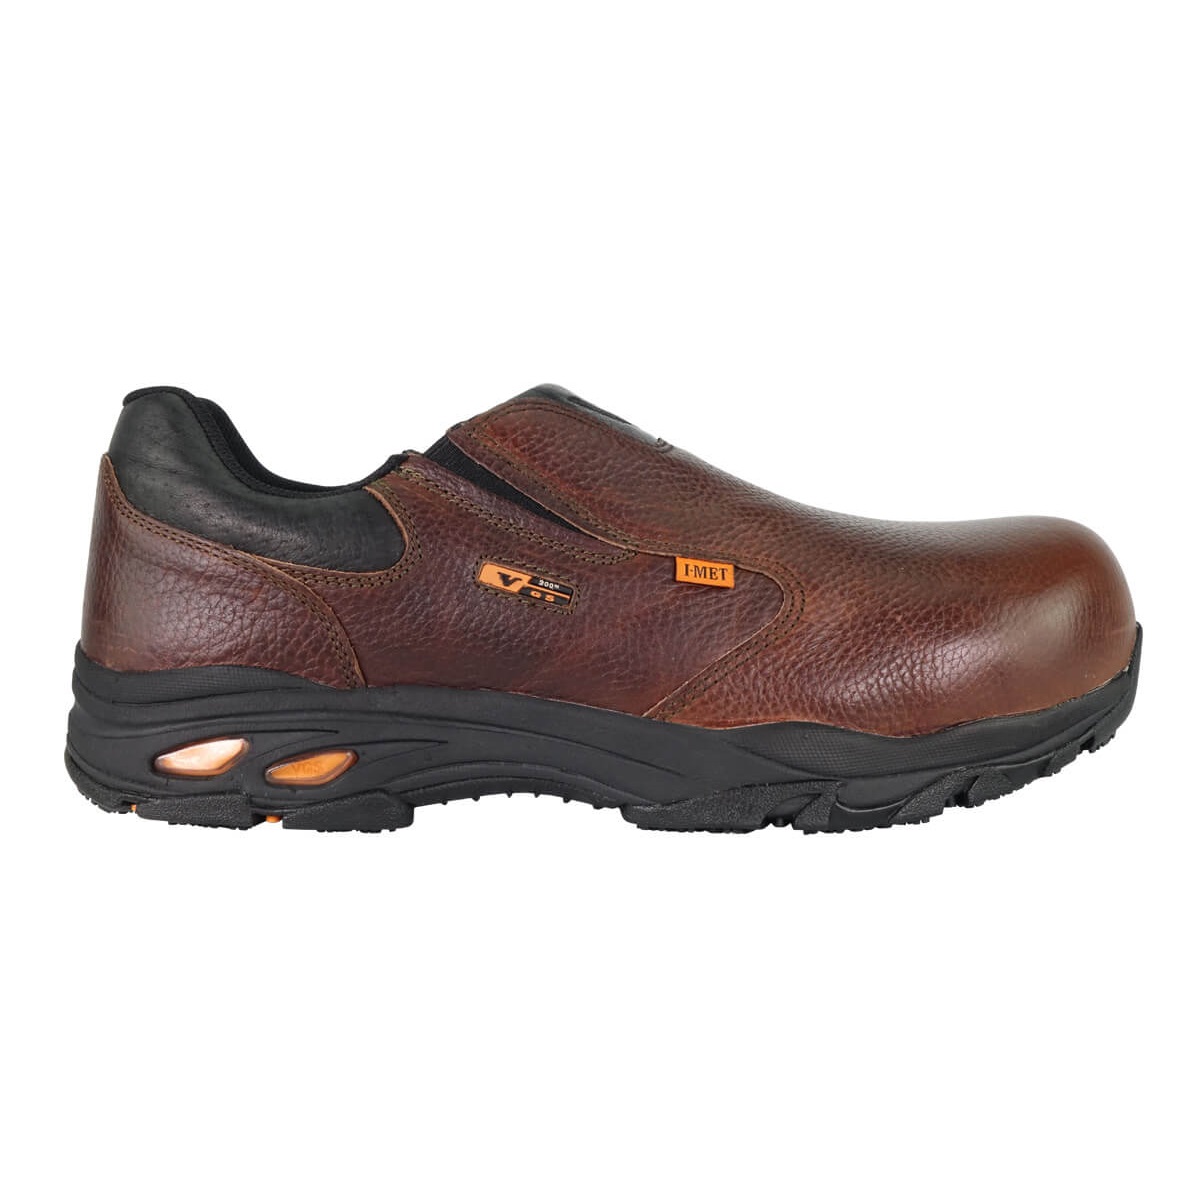 Nautilus Safety Footwear Mens 2421 Industrial & Construction Shoe Get ...